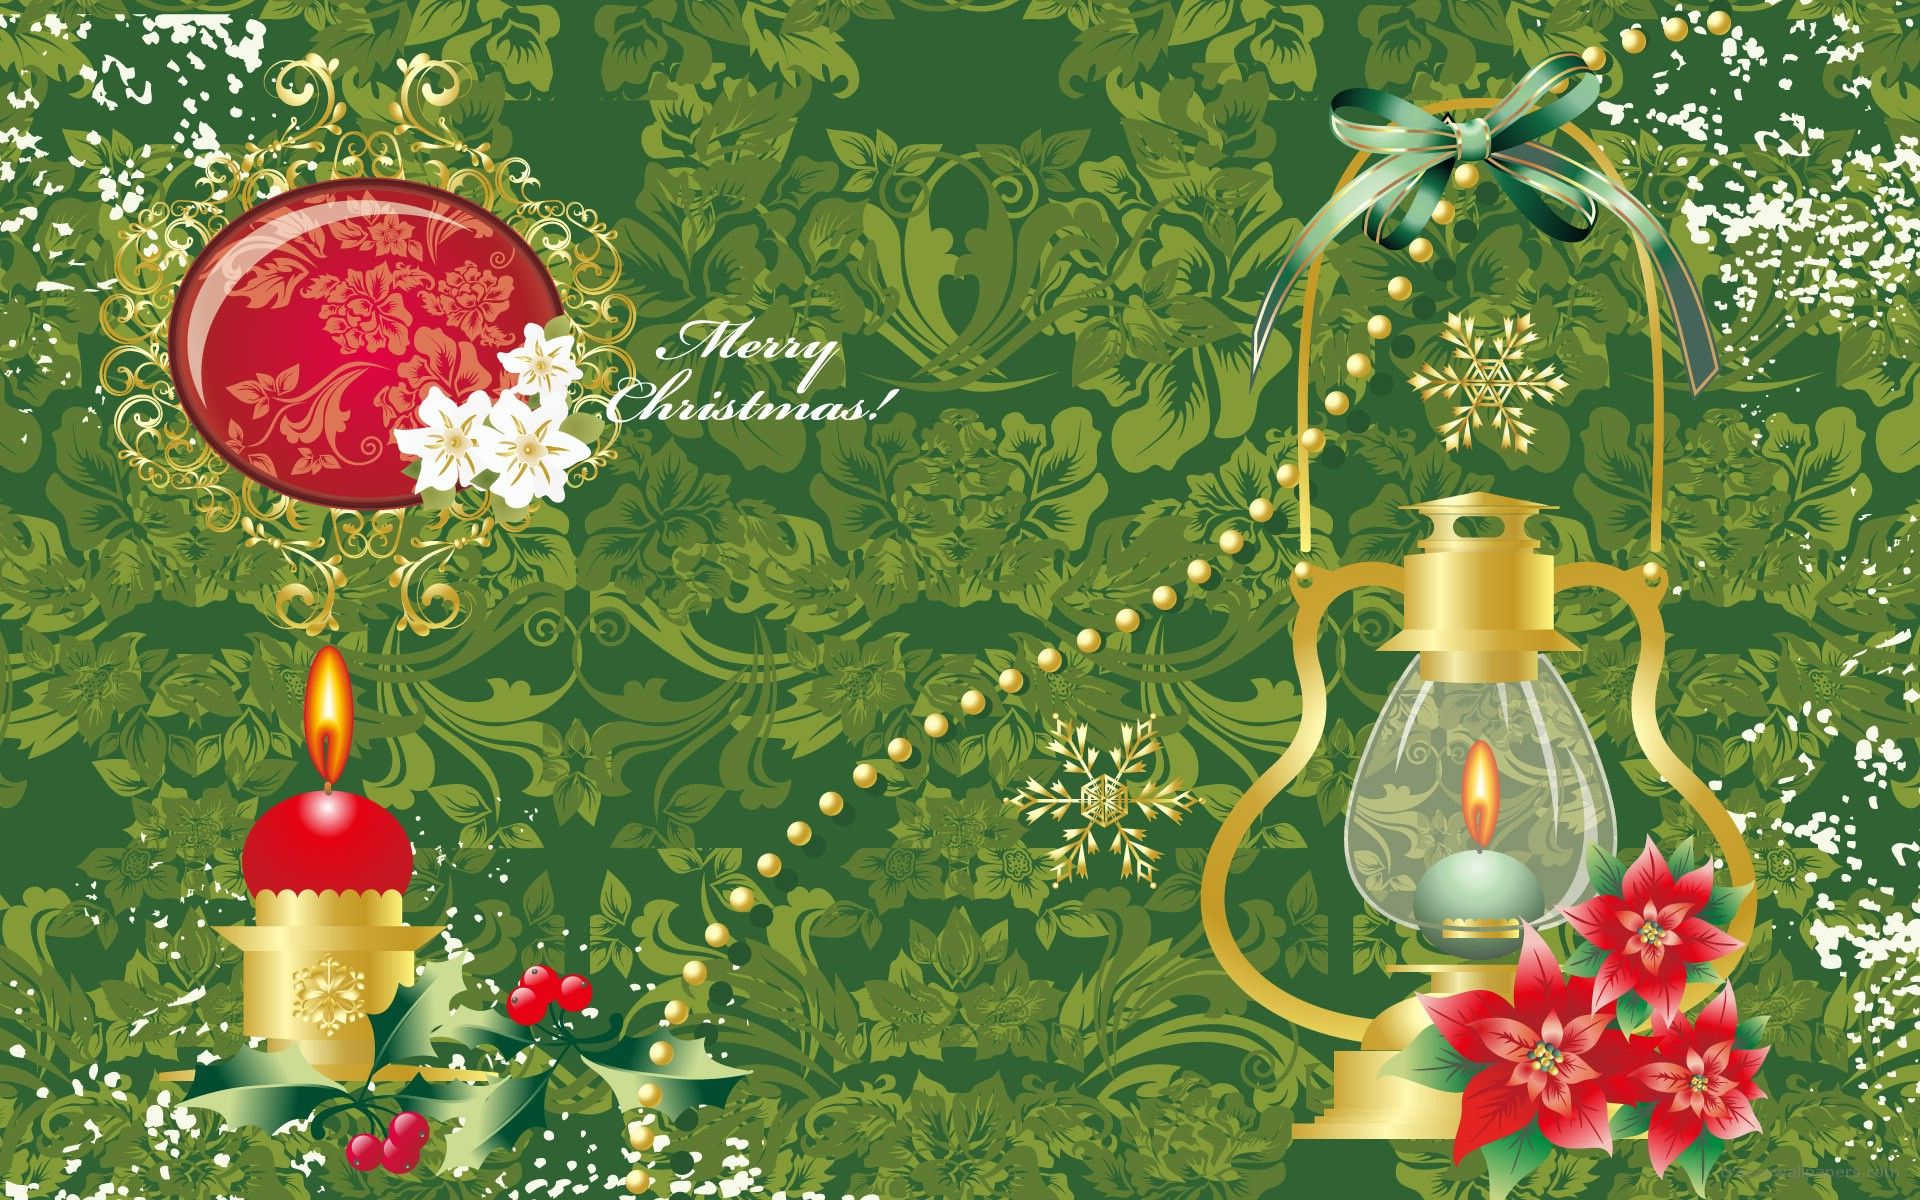 50 Widescreen Christmas Wallpapers to Have Logic of Count Down ...